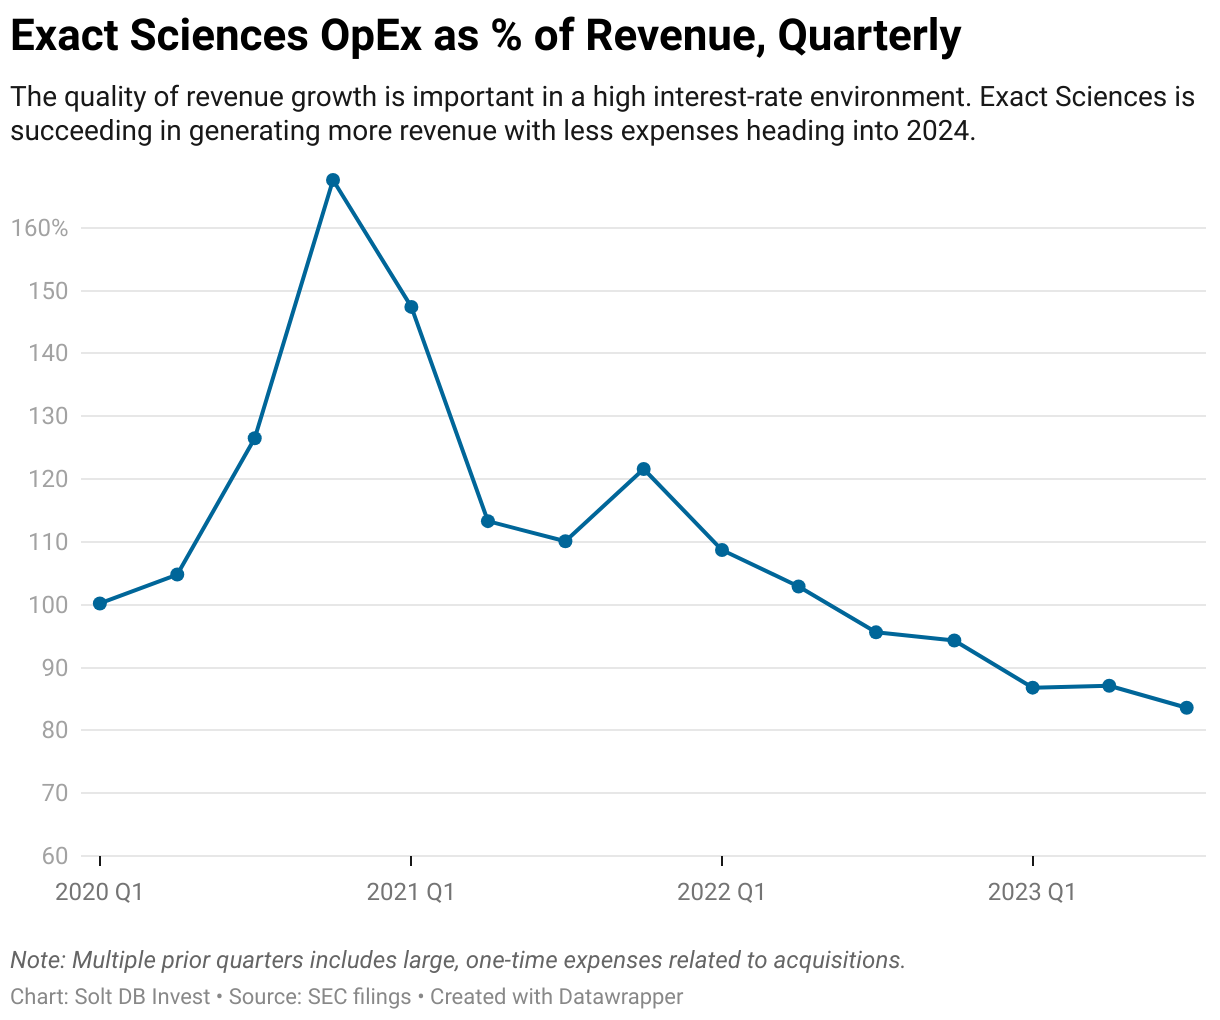 A graph showing operating expenses as a percentage of revenue on a quarterly basis for Exact Sciences, beginning in Q1 2020 and ending in Q3 2023.